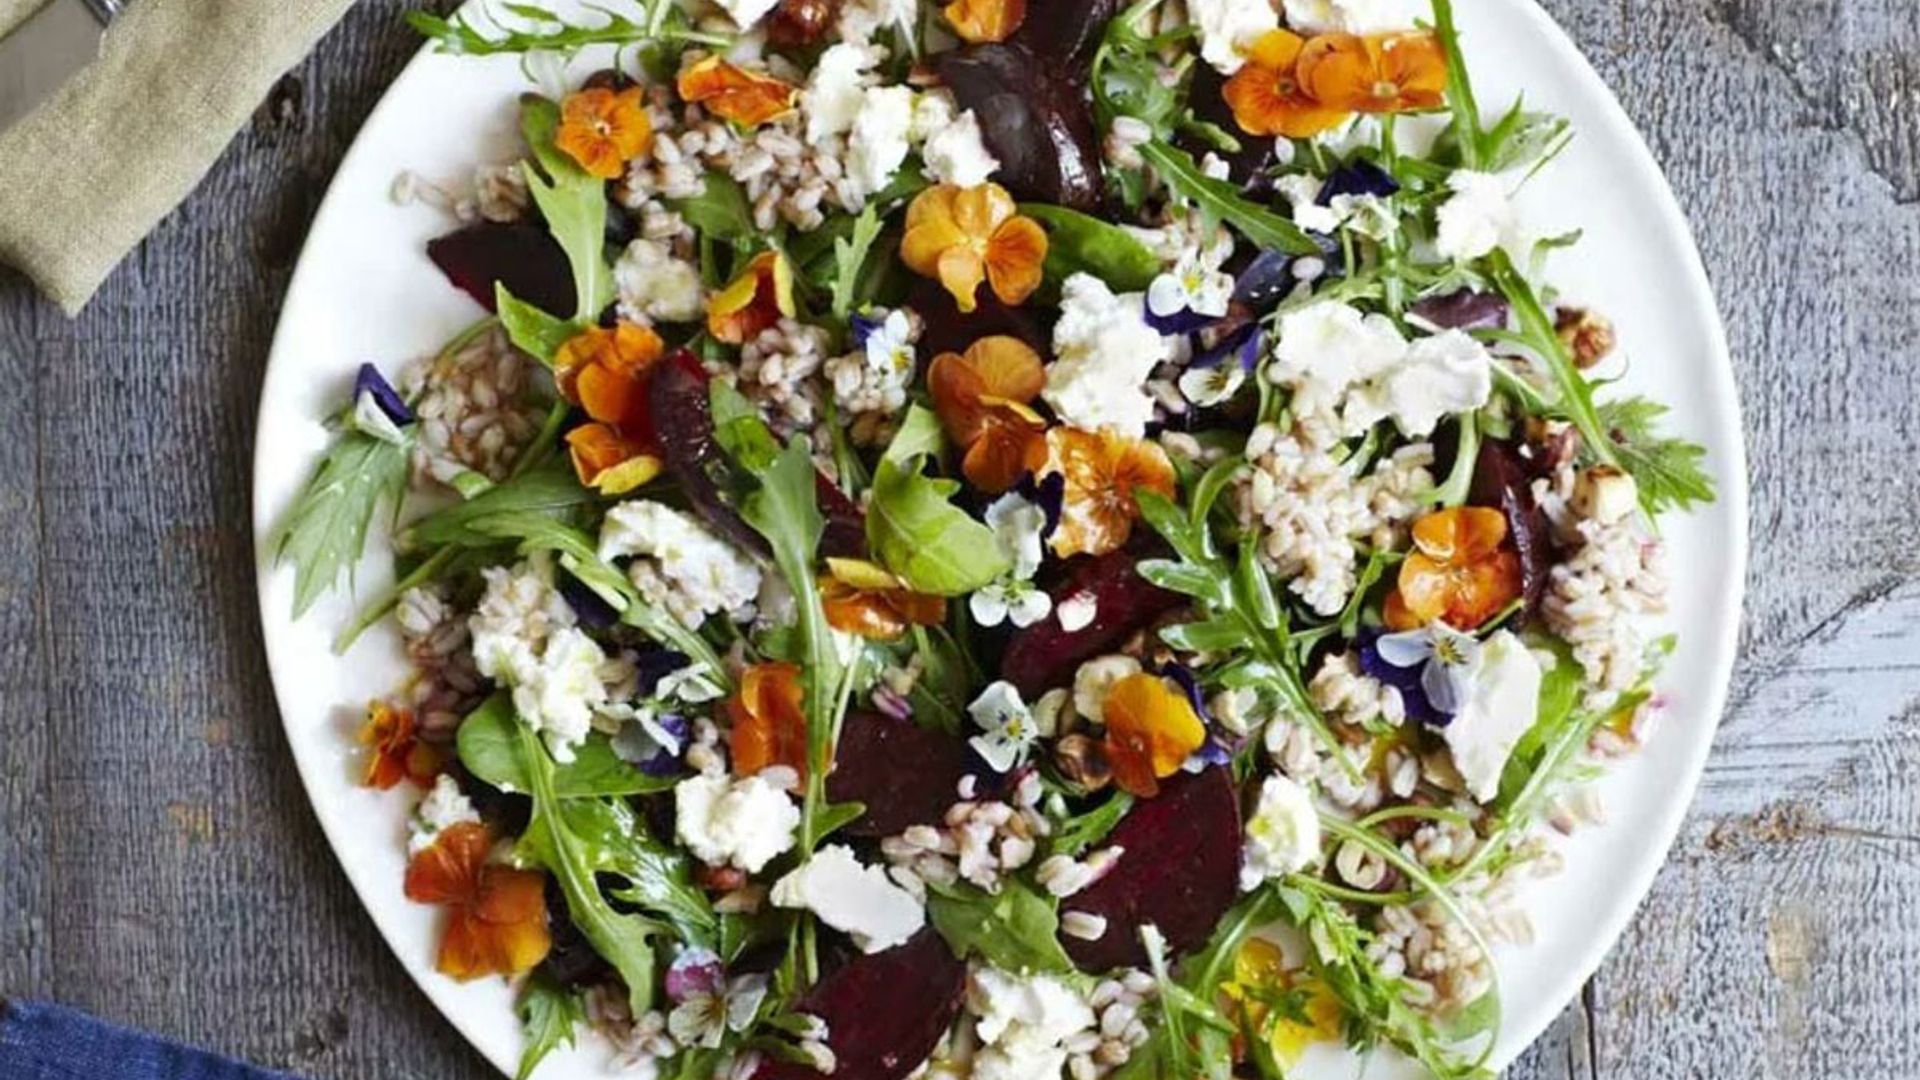 5 tasty summer salad recipes to try this week 